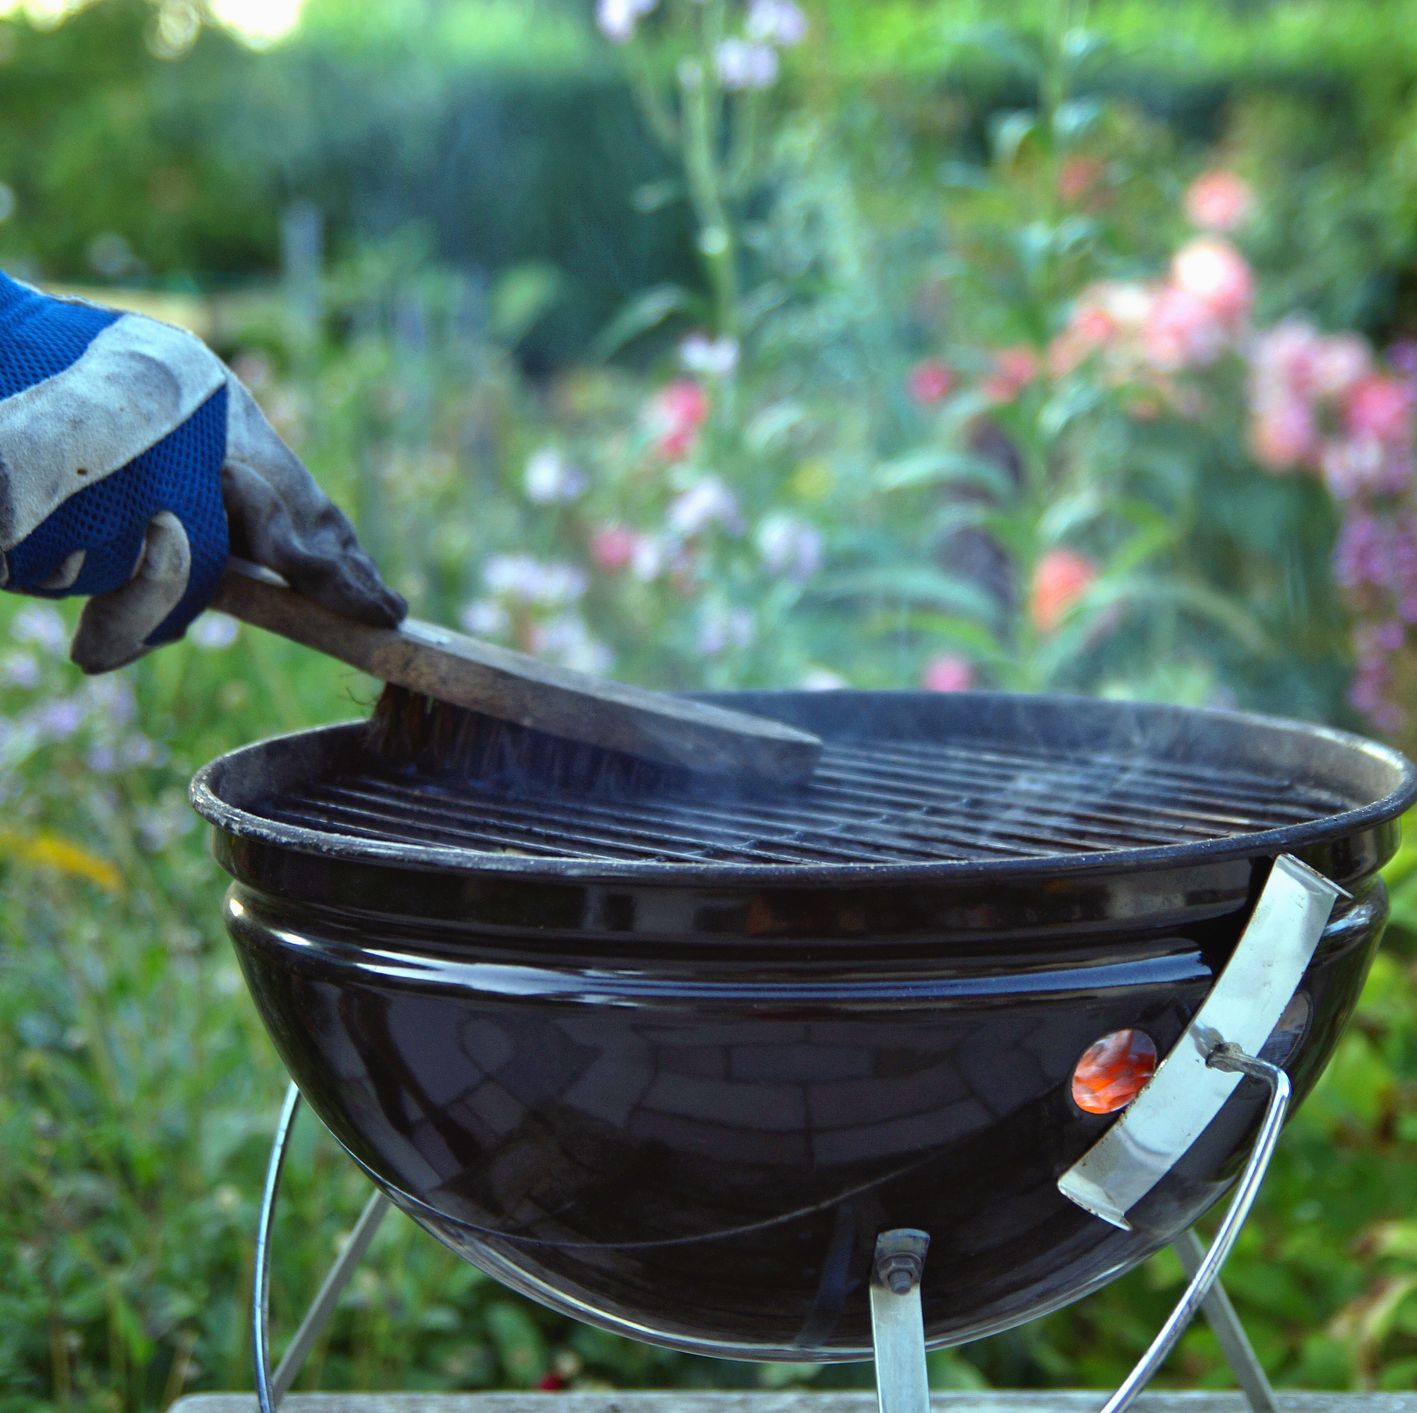 How to Clean a Grill: BBQ Grill Cleaning Guide